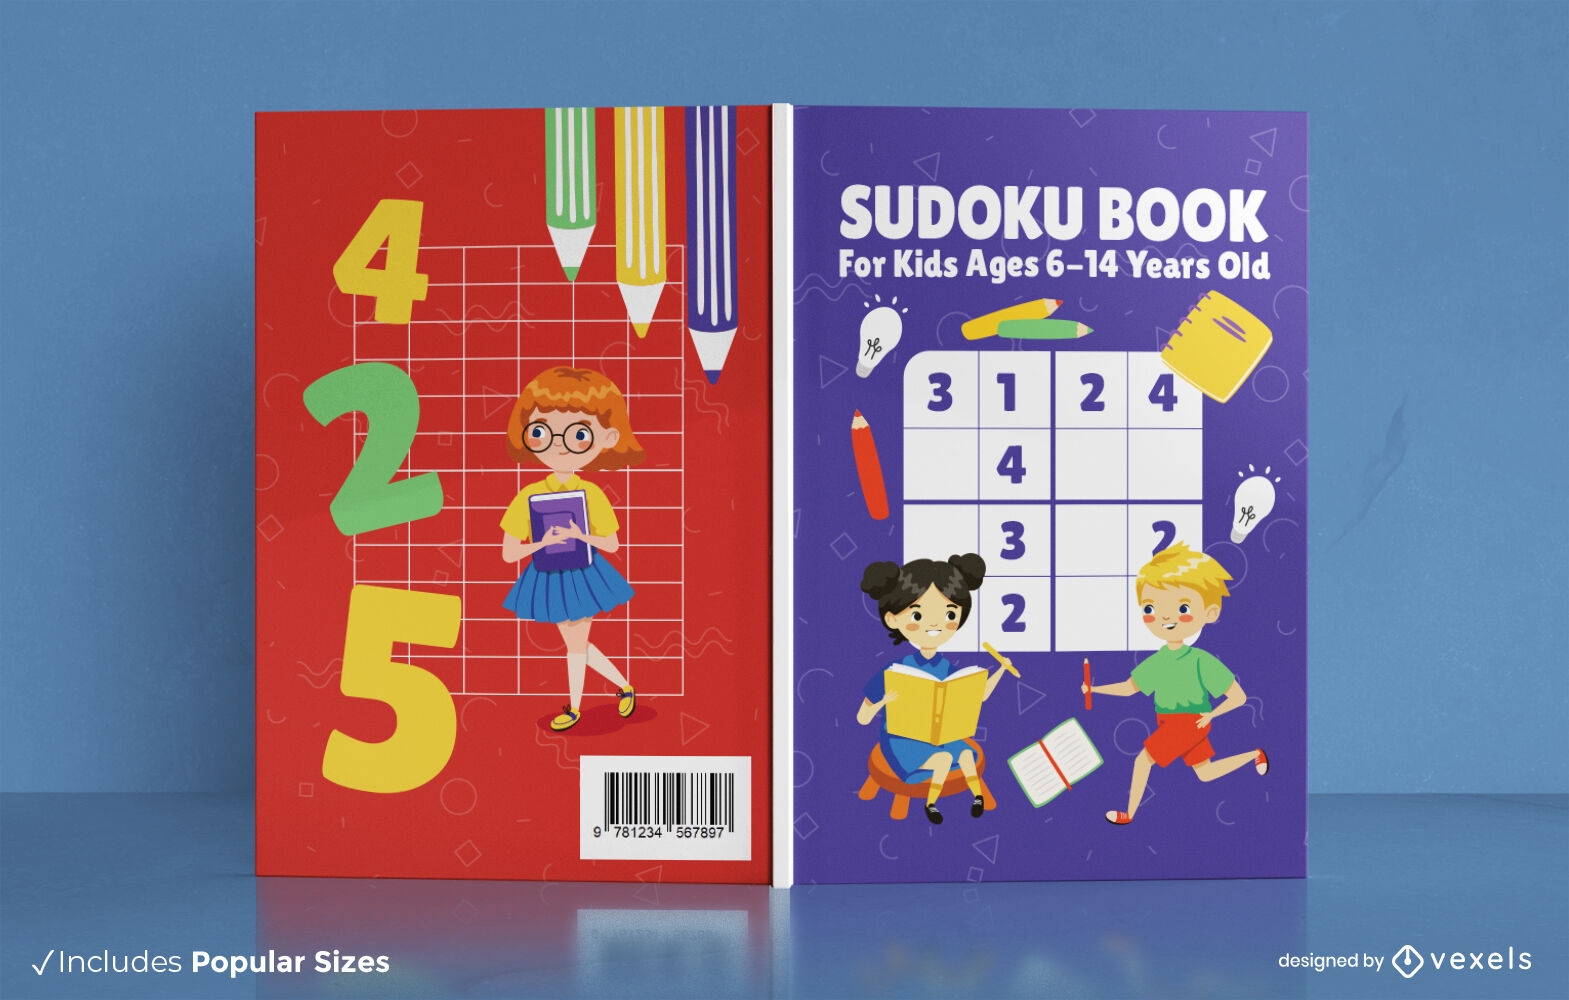 Children playing sudoku book cover design